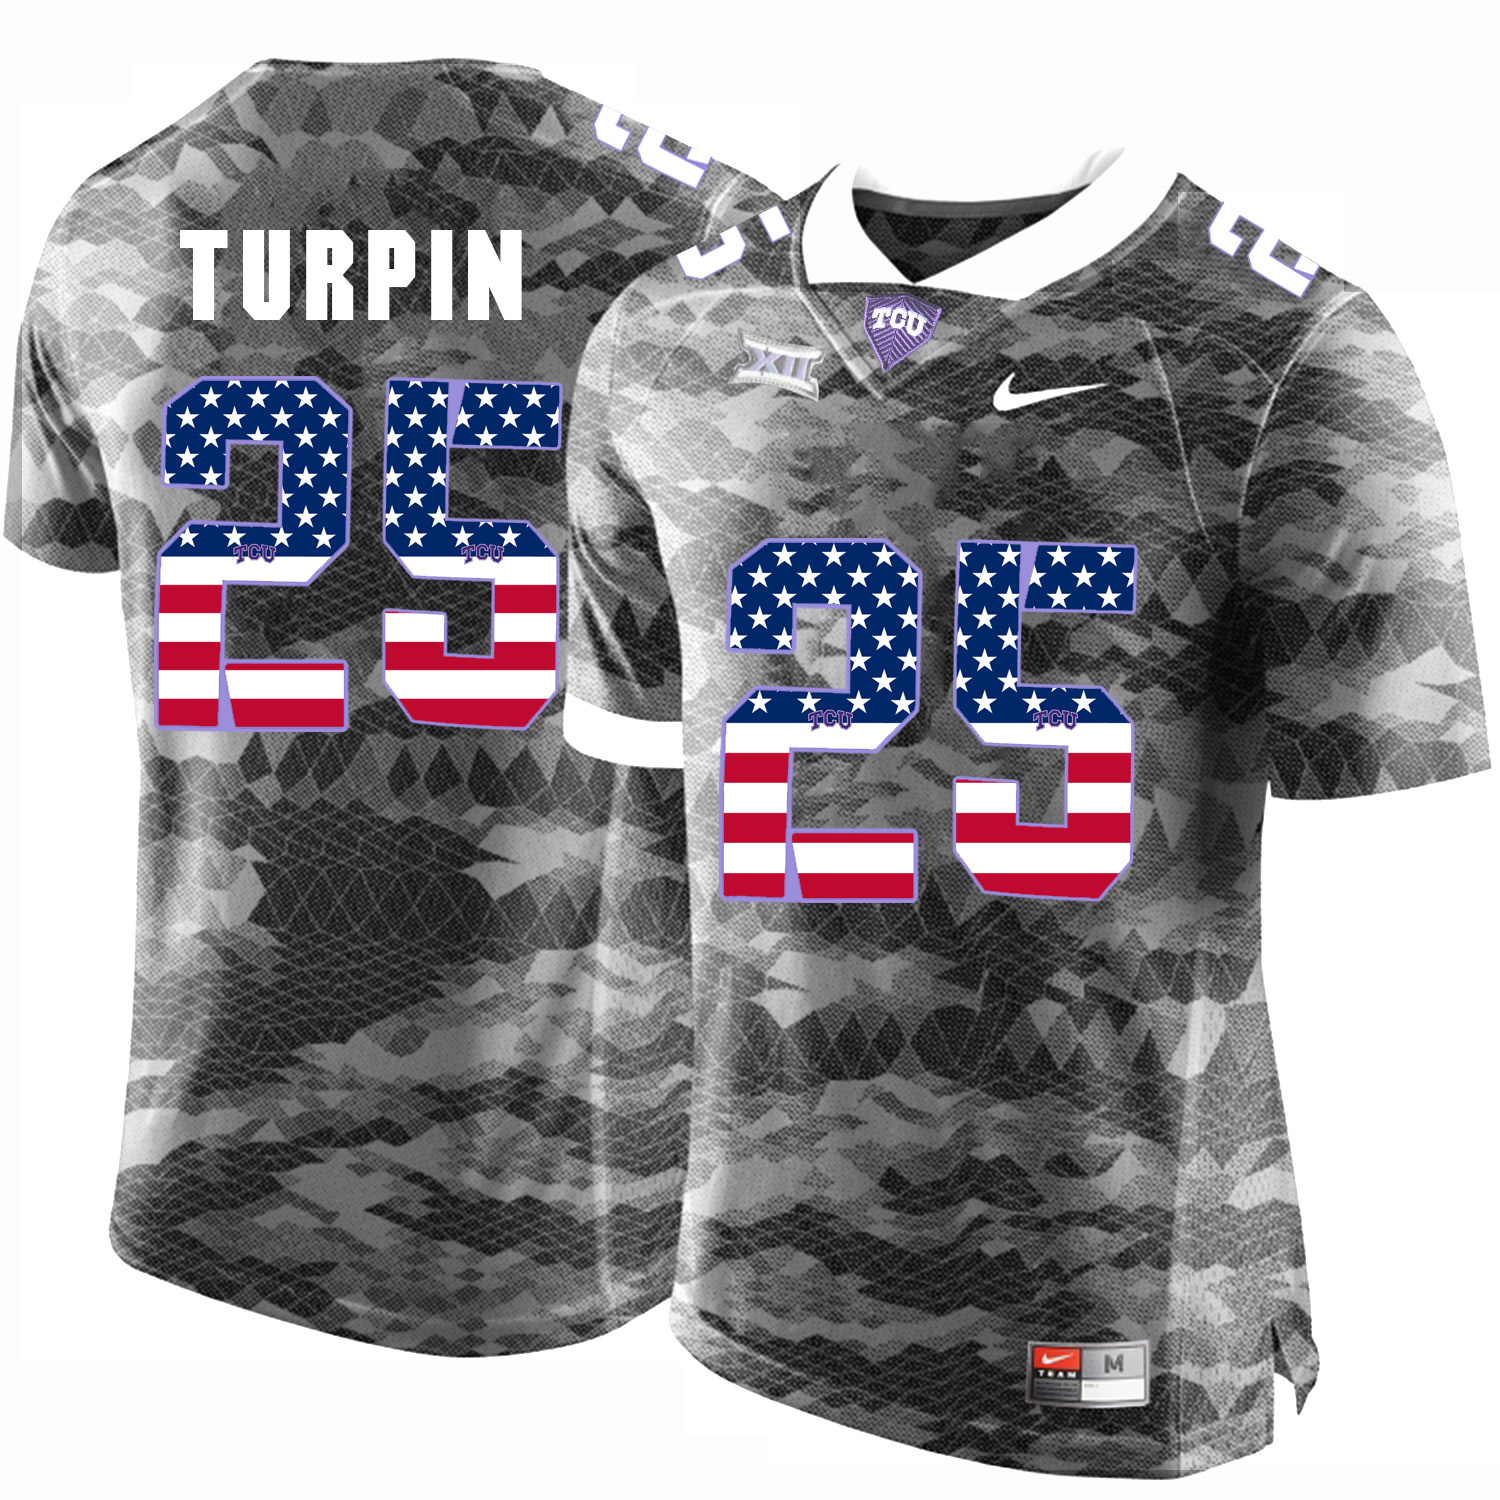 TCU Horned Frogs 25 TURPIN Gray USA Flag College Football Jersey